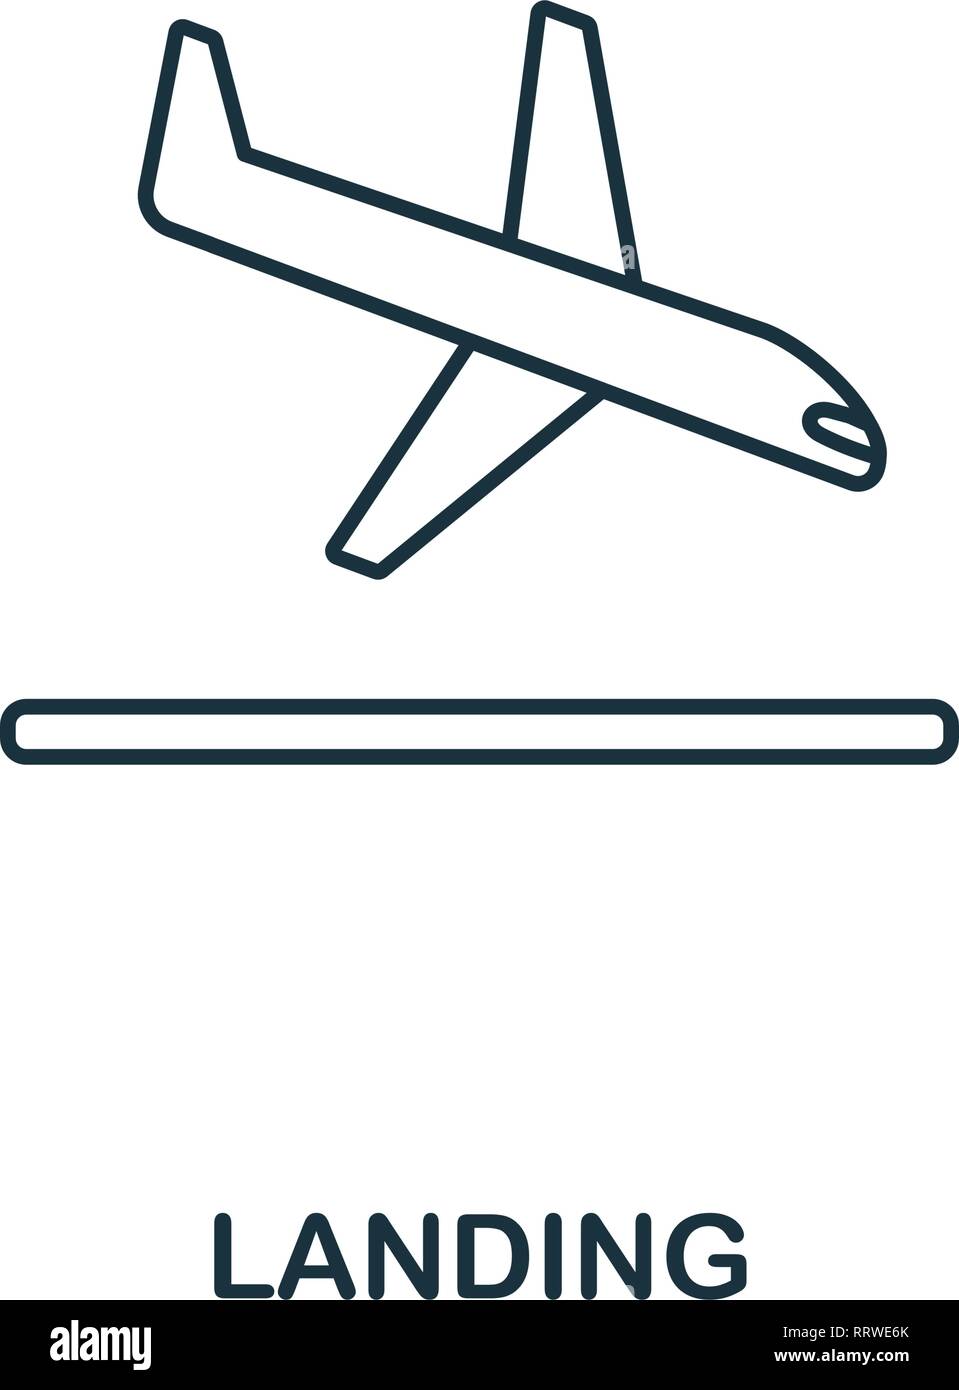 Landing icon. Outline thin line style from airport icons collection. Pixel perfect Landing icon for web design, apps, software, print usage Stock Vector